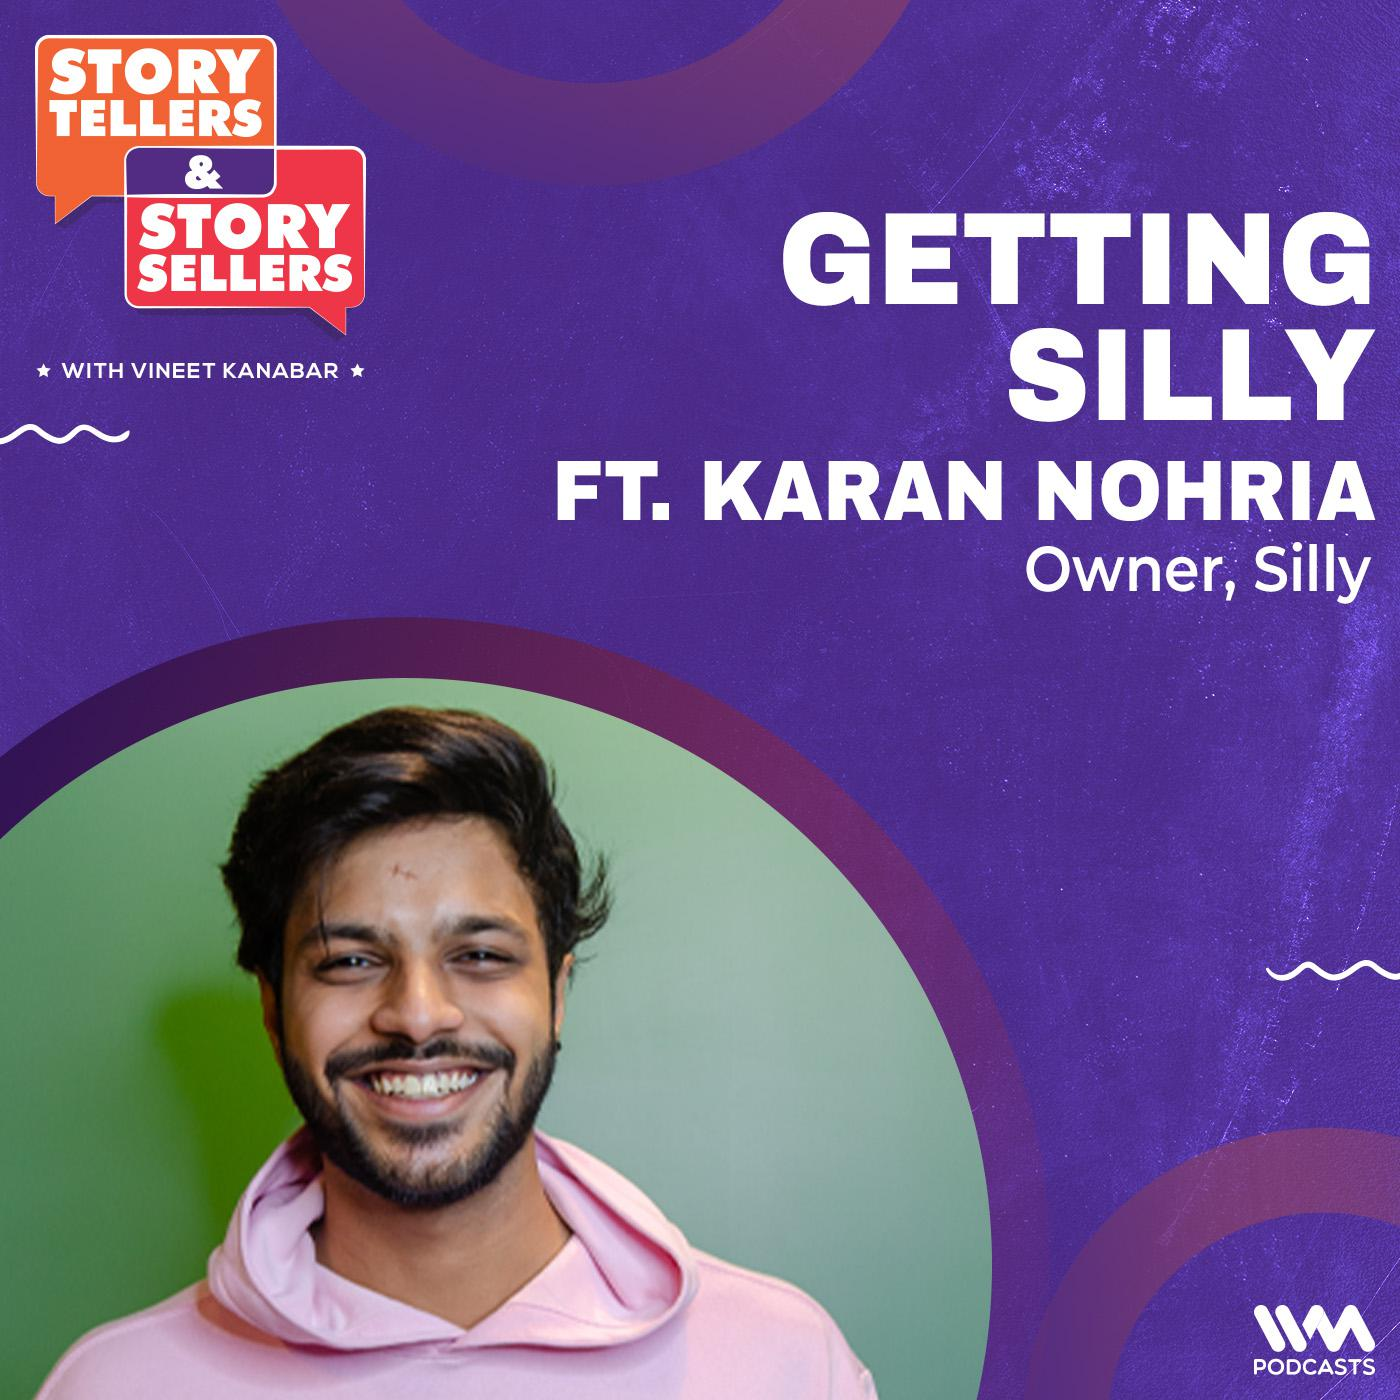 Getting Silly ft. Karan Nohria